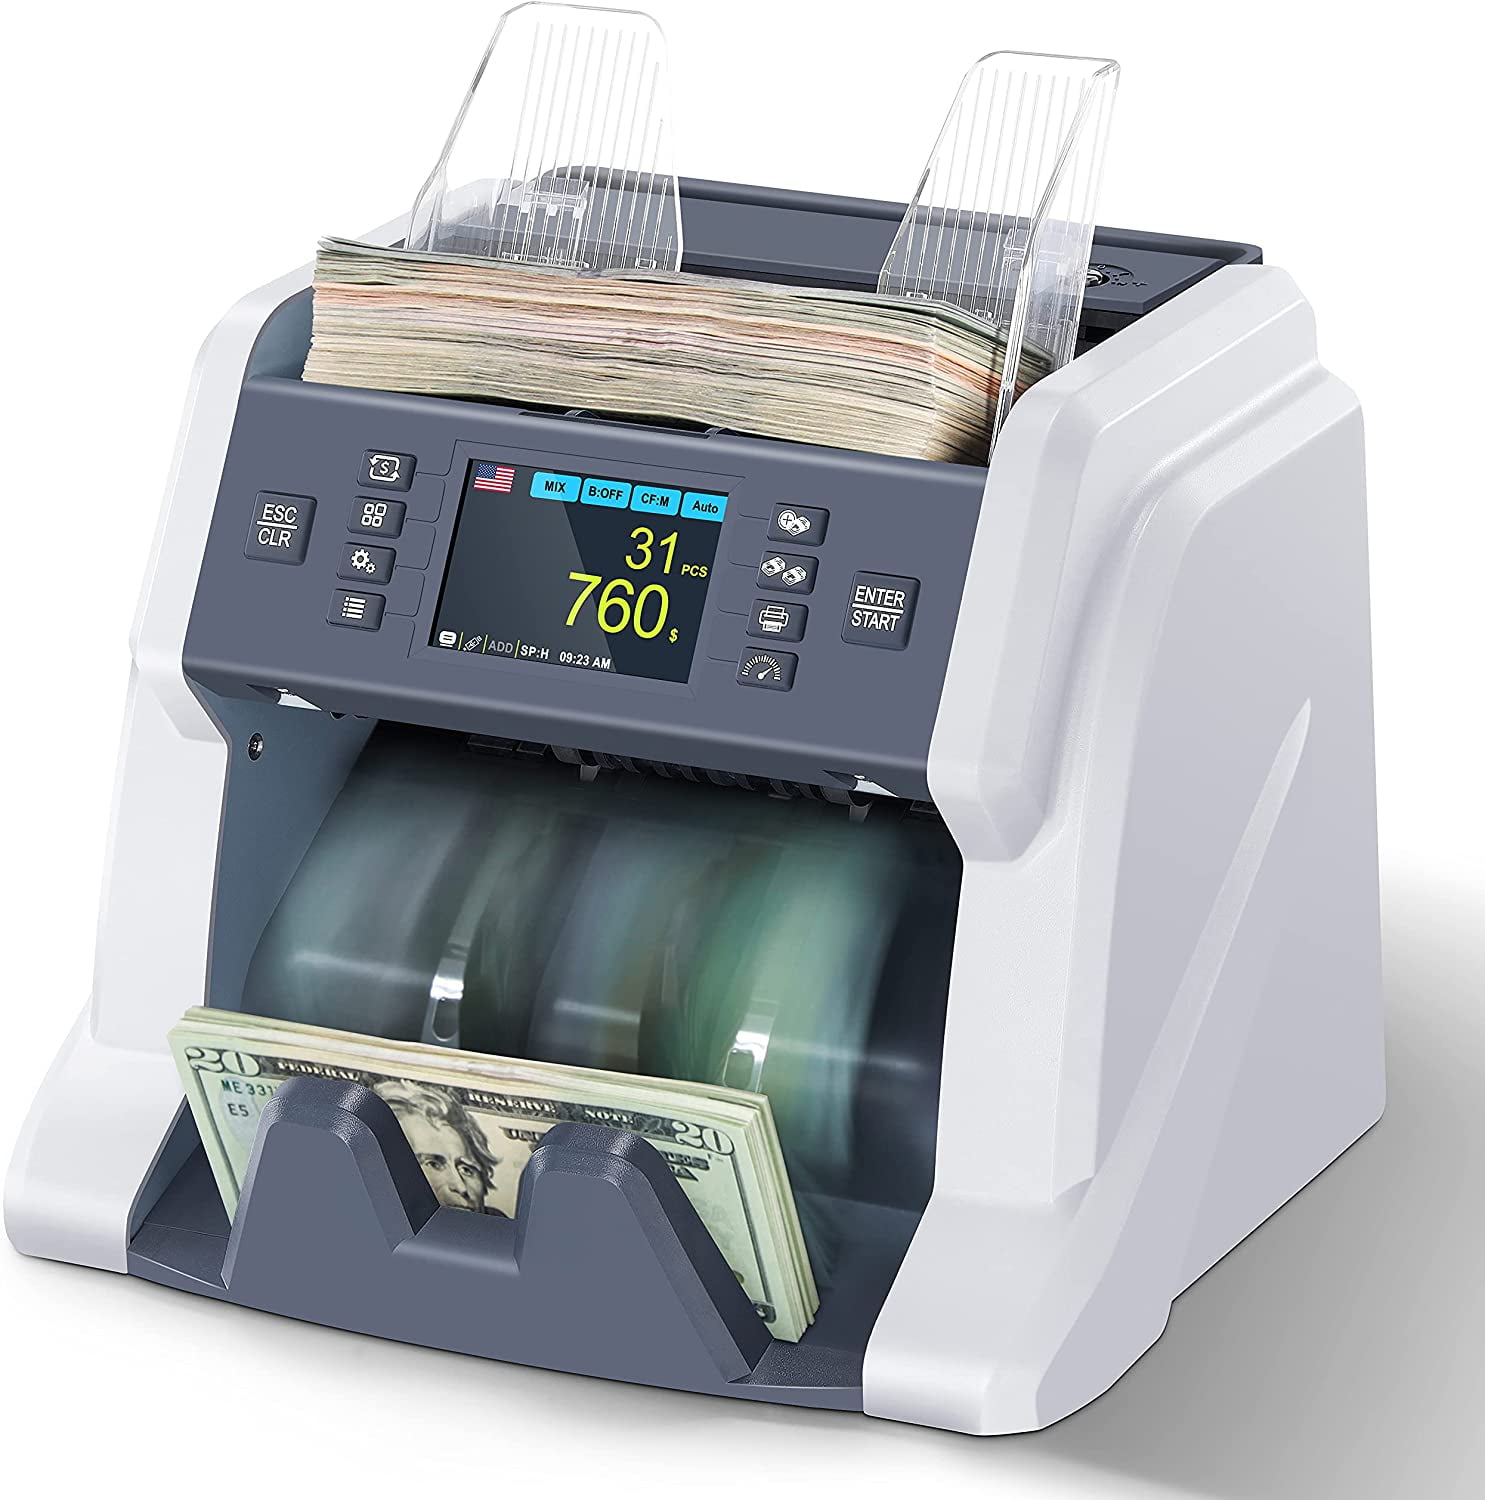 Fast Detects UV MG Mixed Denomination Bill Counter by Carnation Works Worldwide IR MT User-Friendly Money Counter Machine